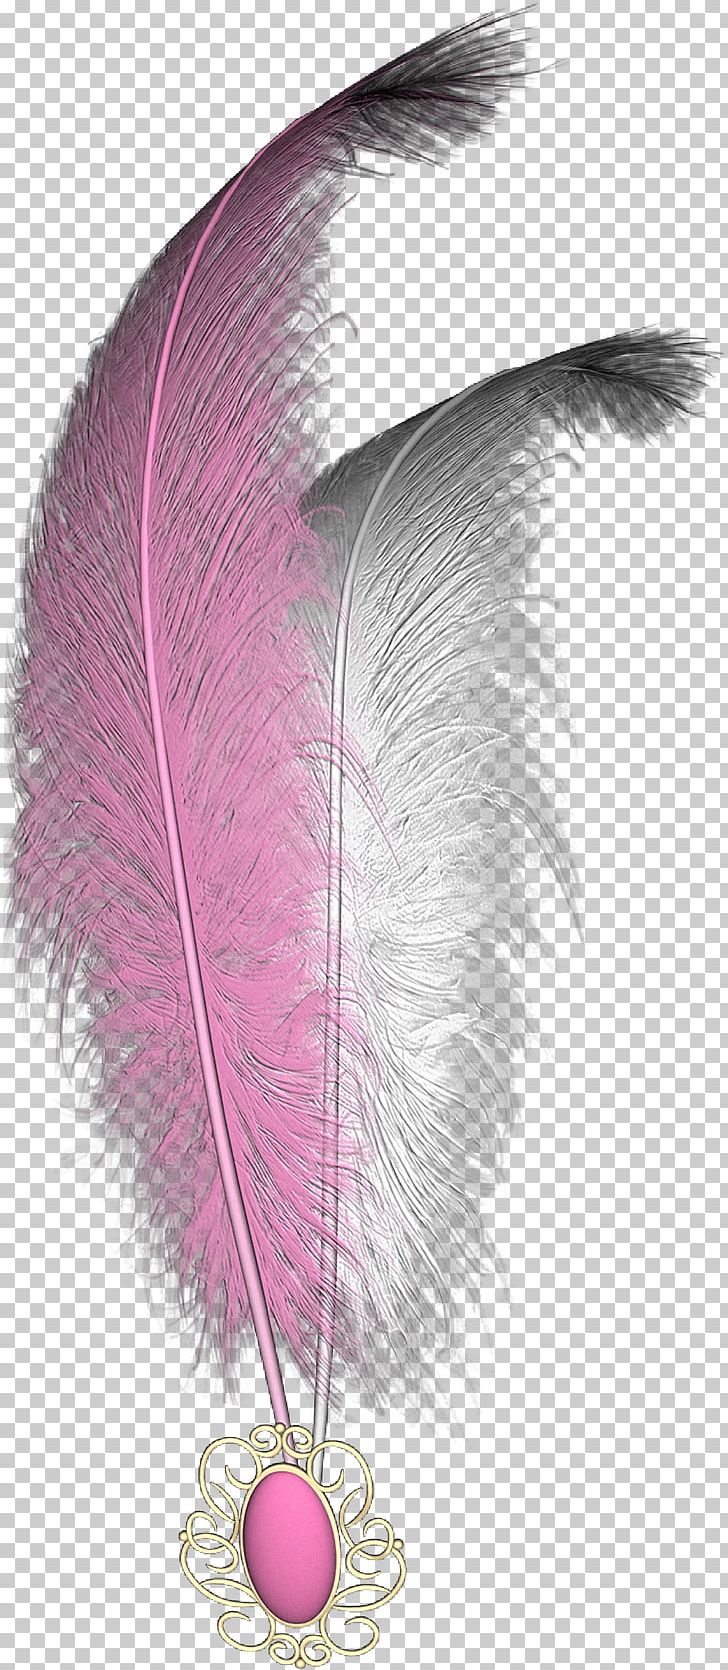 White Animals Peacock Feather PNG, Clipart, Animals, Clip Art, Download, Encapsulated Postscript, Feather Free PNG Download